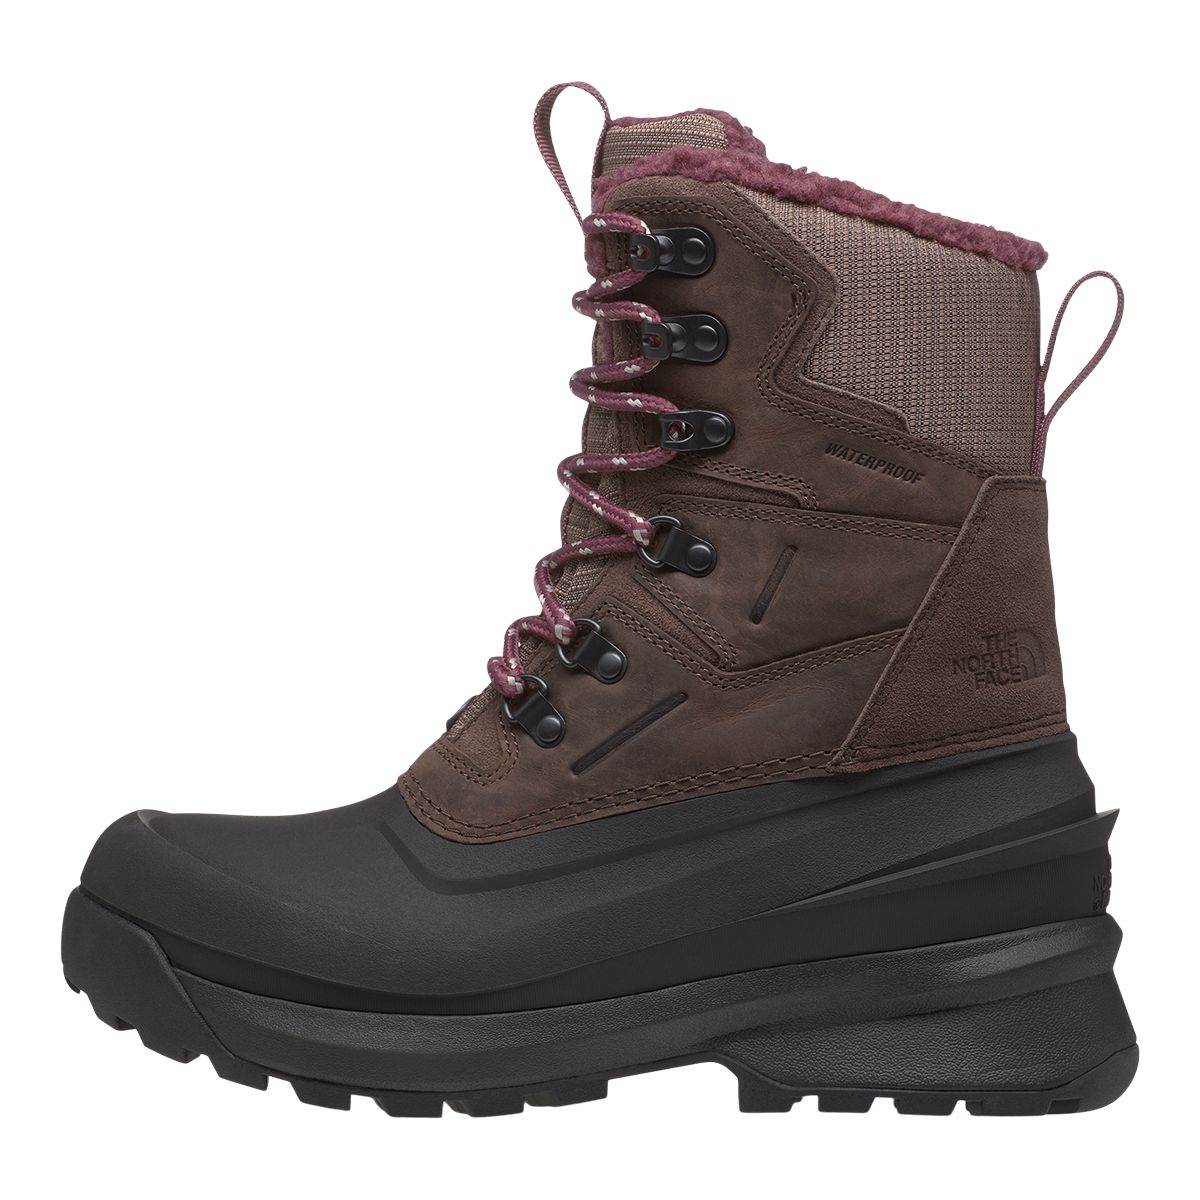 Image of The North Face Women's Chilkat V 400 Waterproof Insulated Lightweight Winter Boots